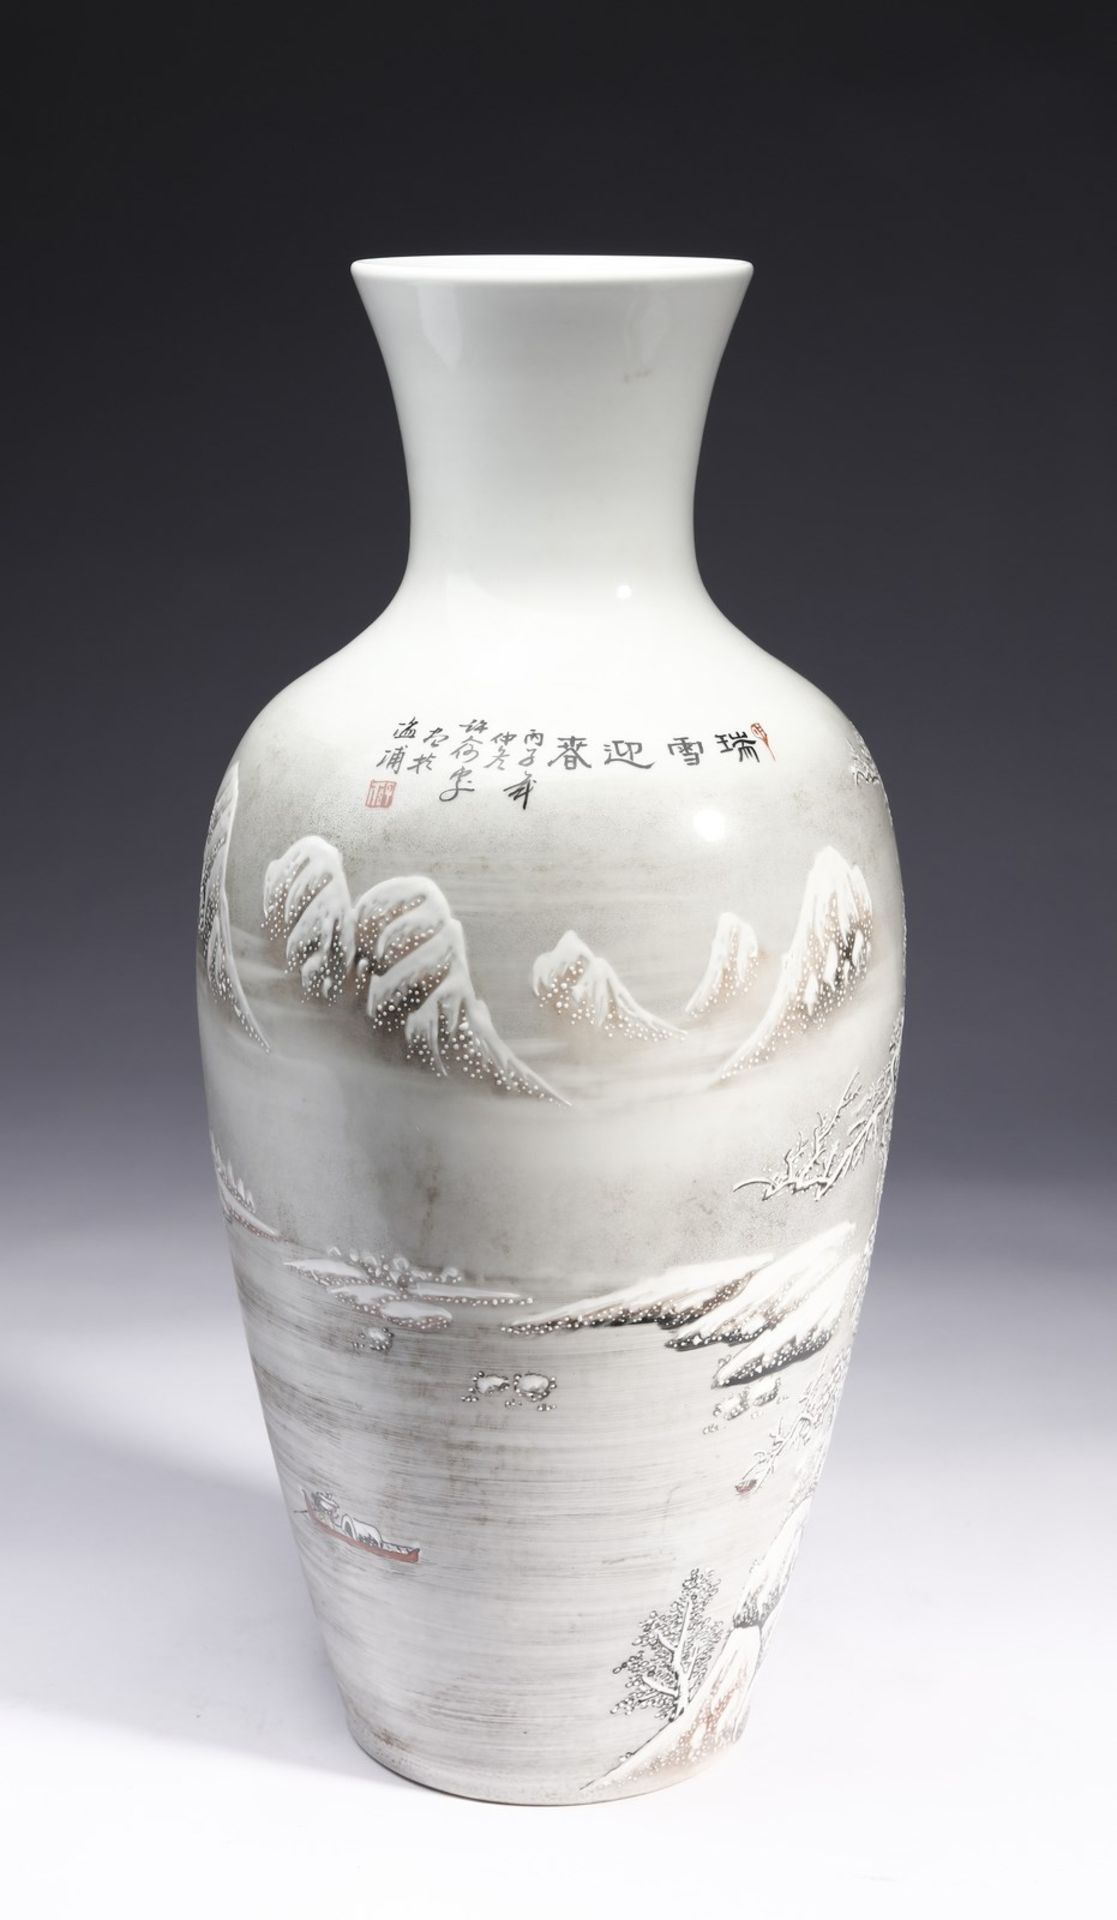 A porcelain vase decorated with snowy landscape, inscription and red iron mark at the base China, - Image 2 of 3